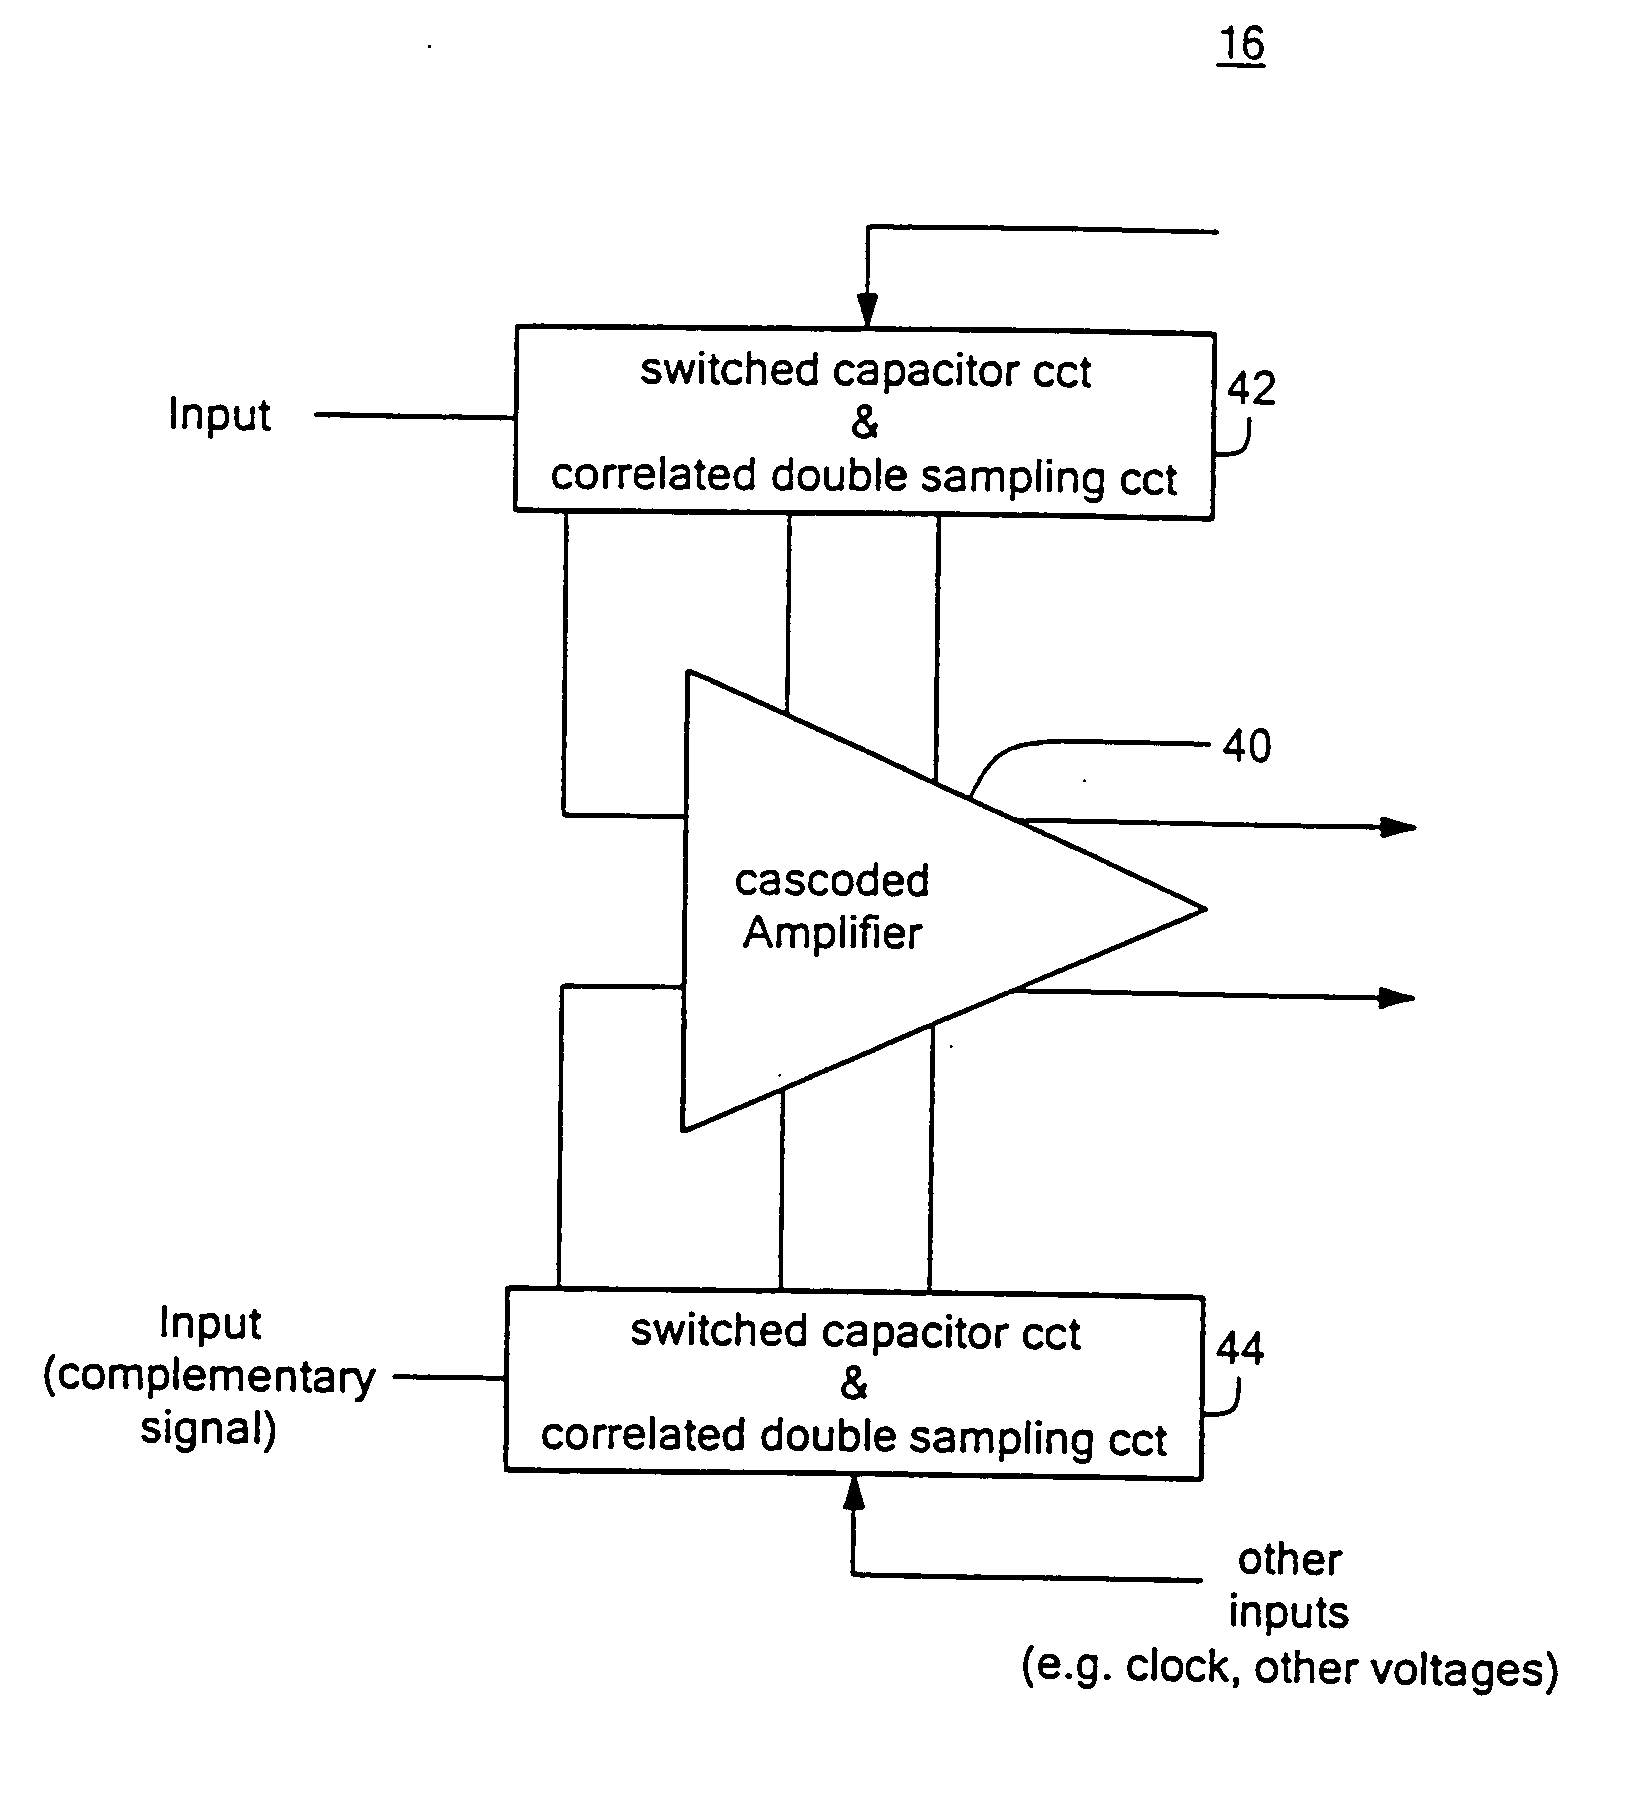 Switched capacitor integrator system